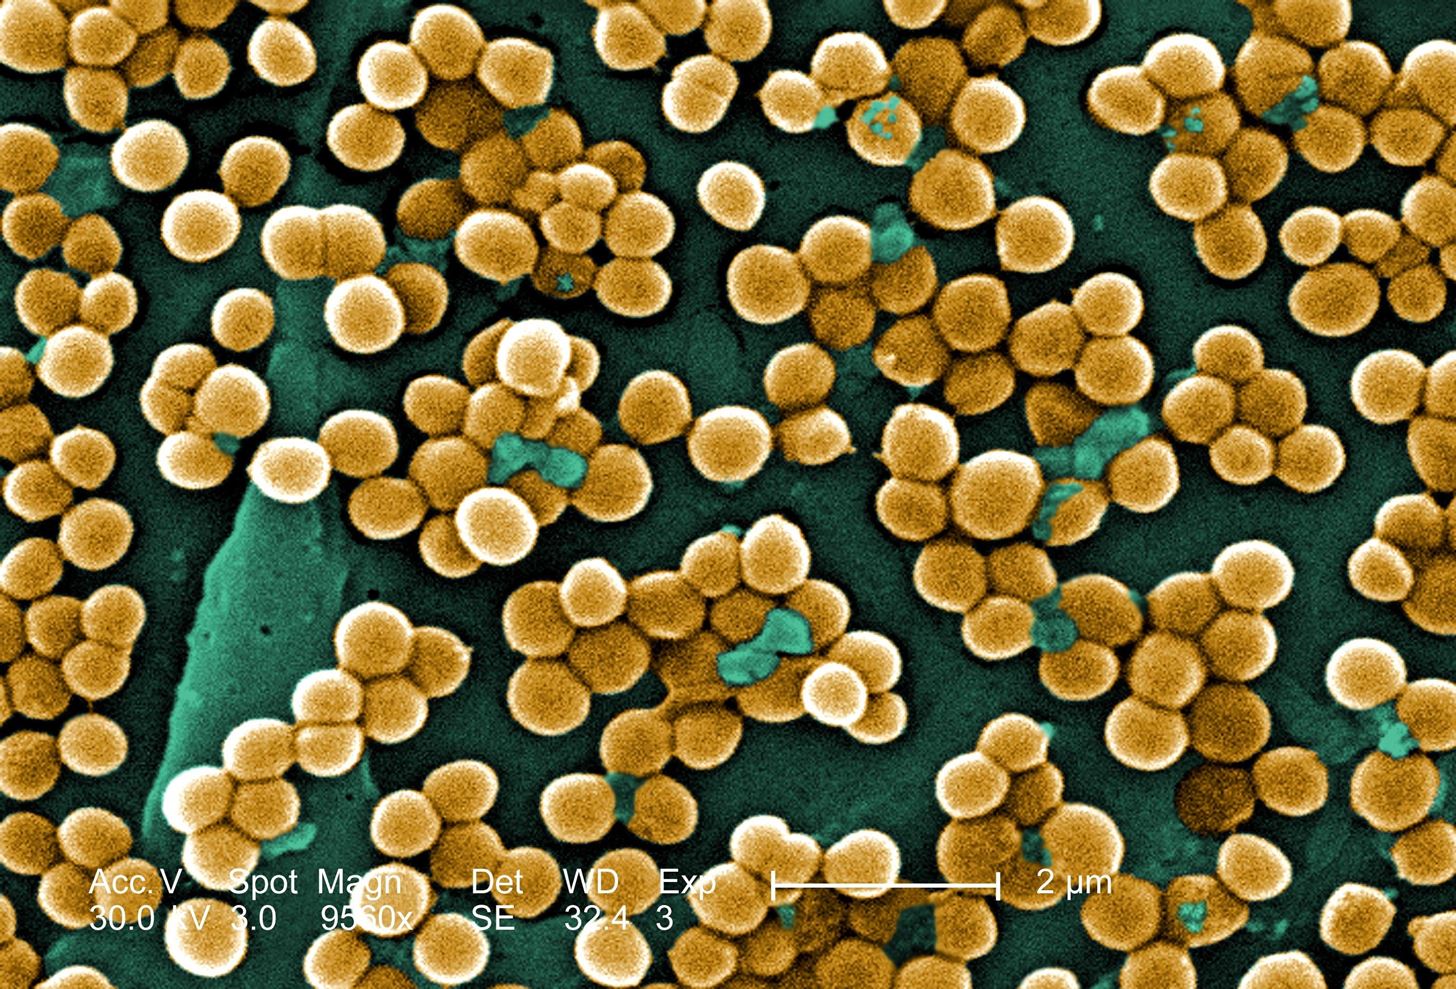 Microbes Are Everywhere—But Those on Your Cell Phone Can Be Dangerous, Especially During Cold & Flu Season